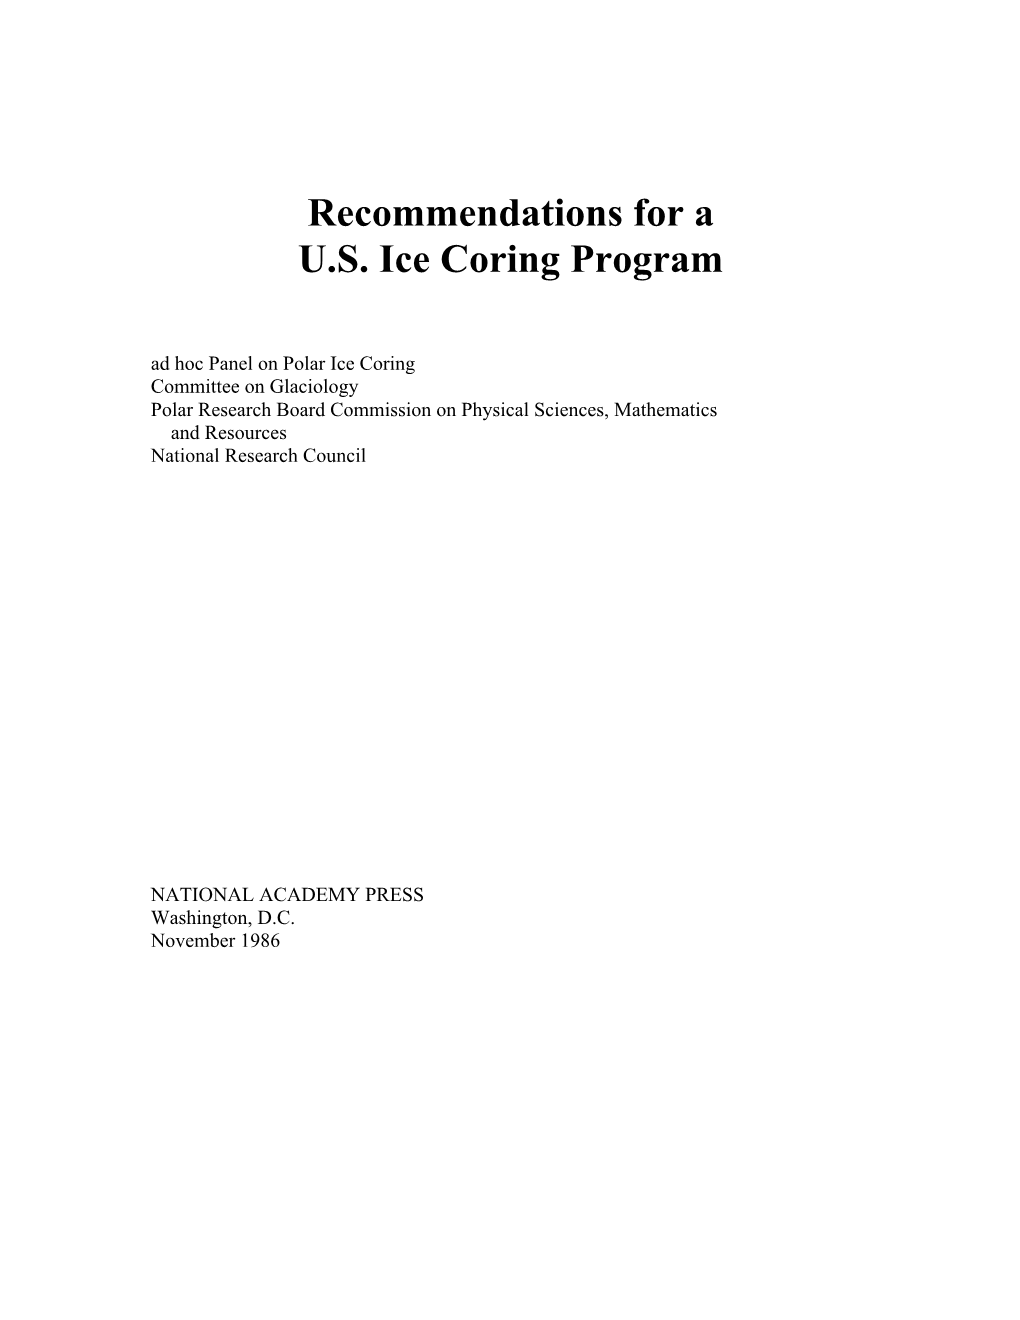 Recommendations for a US Ice Coring Program